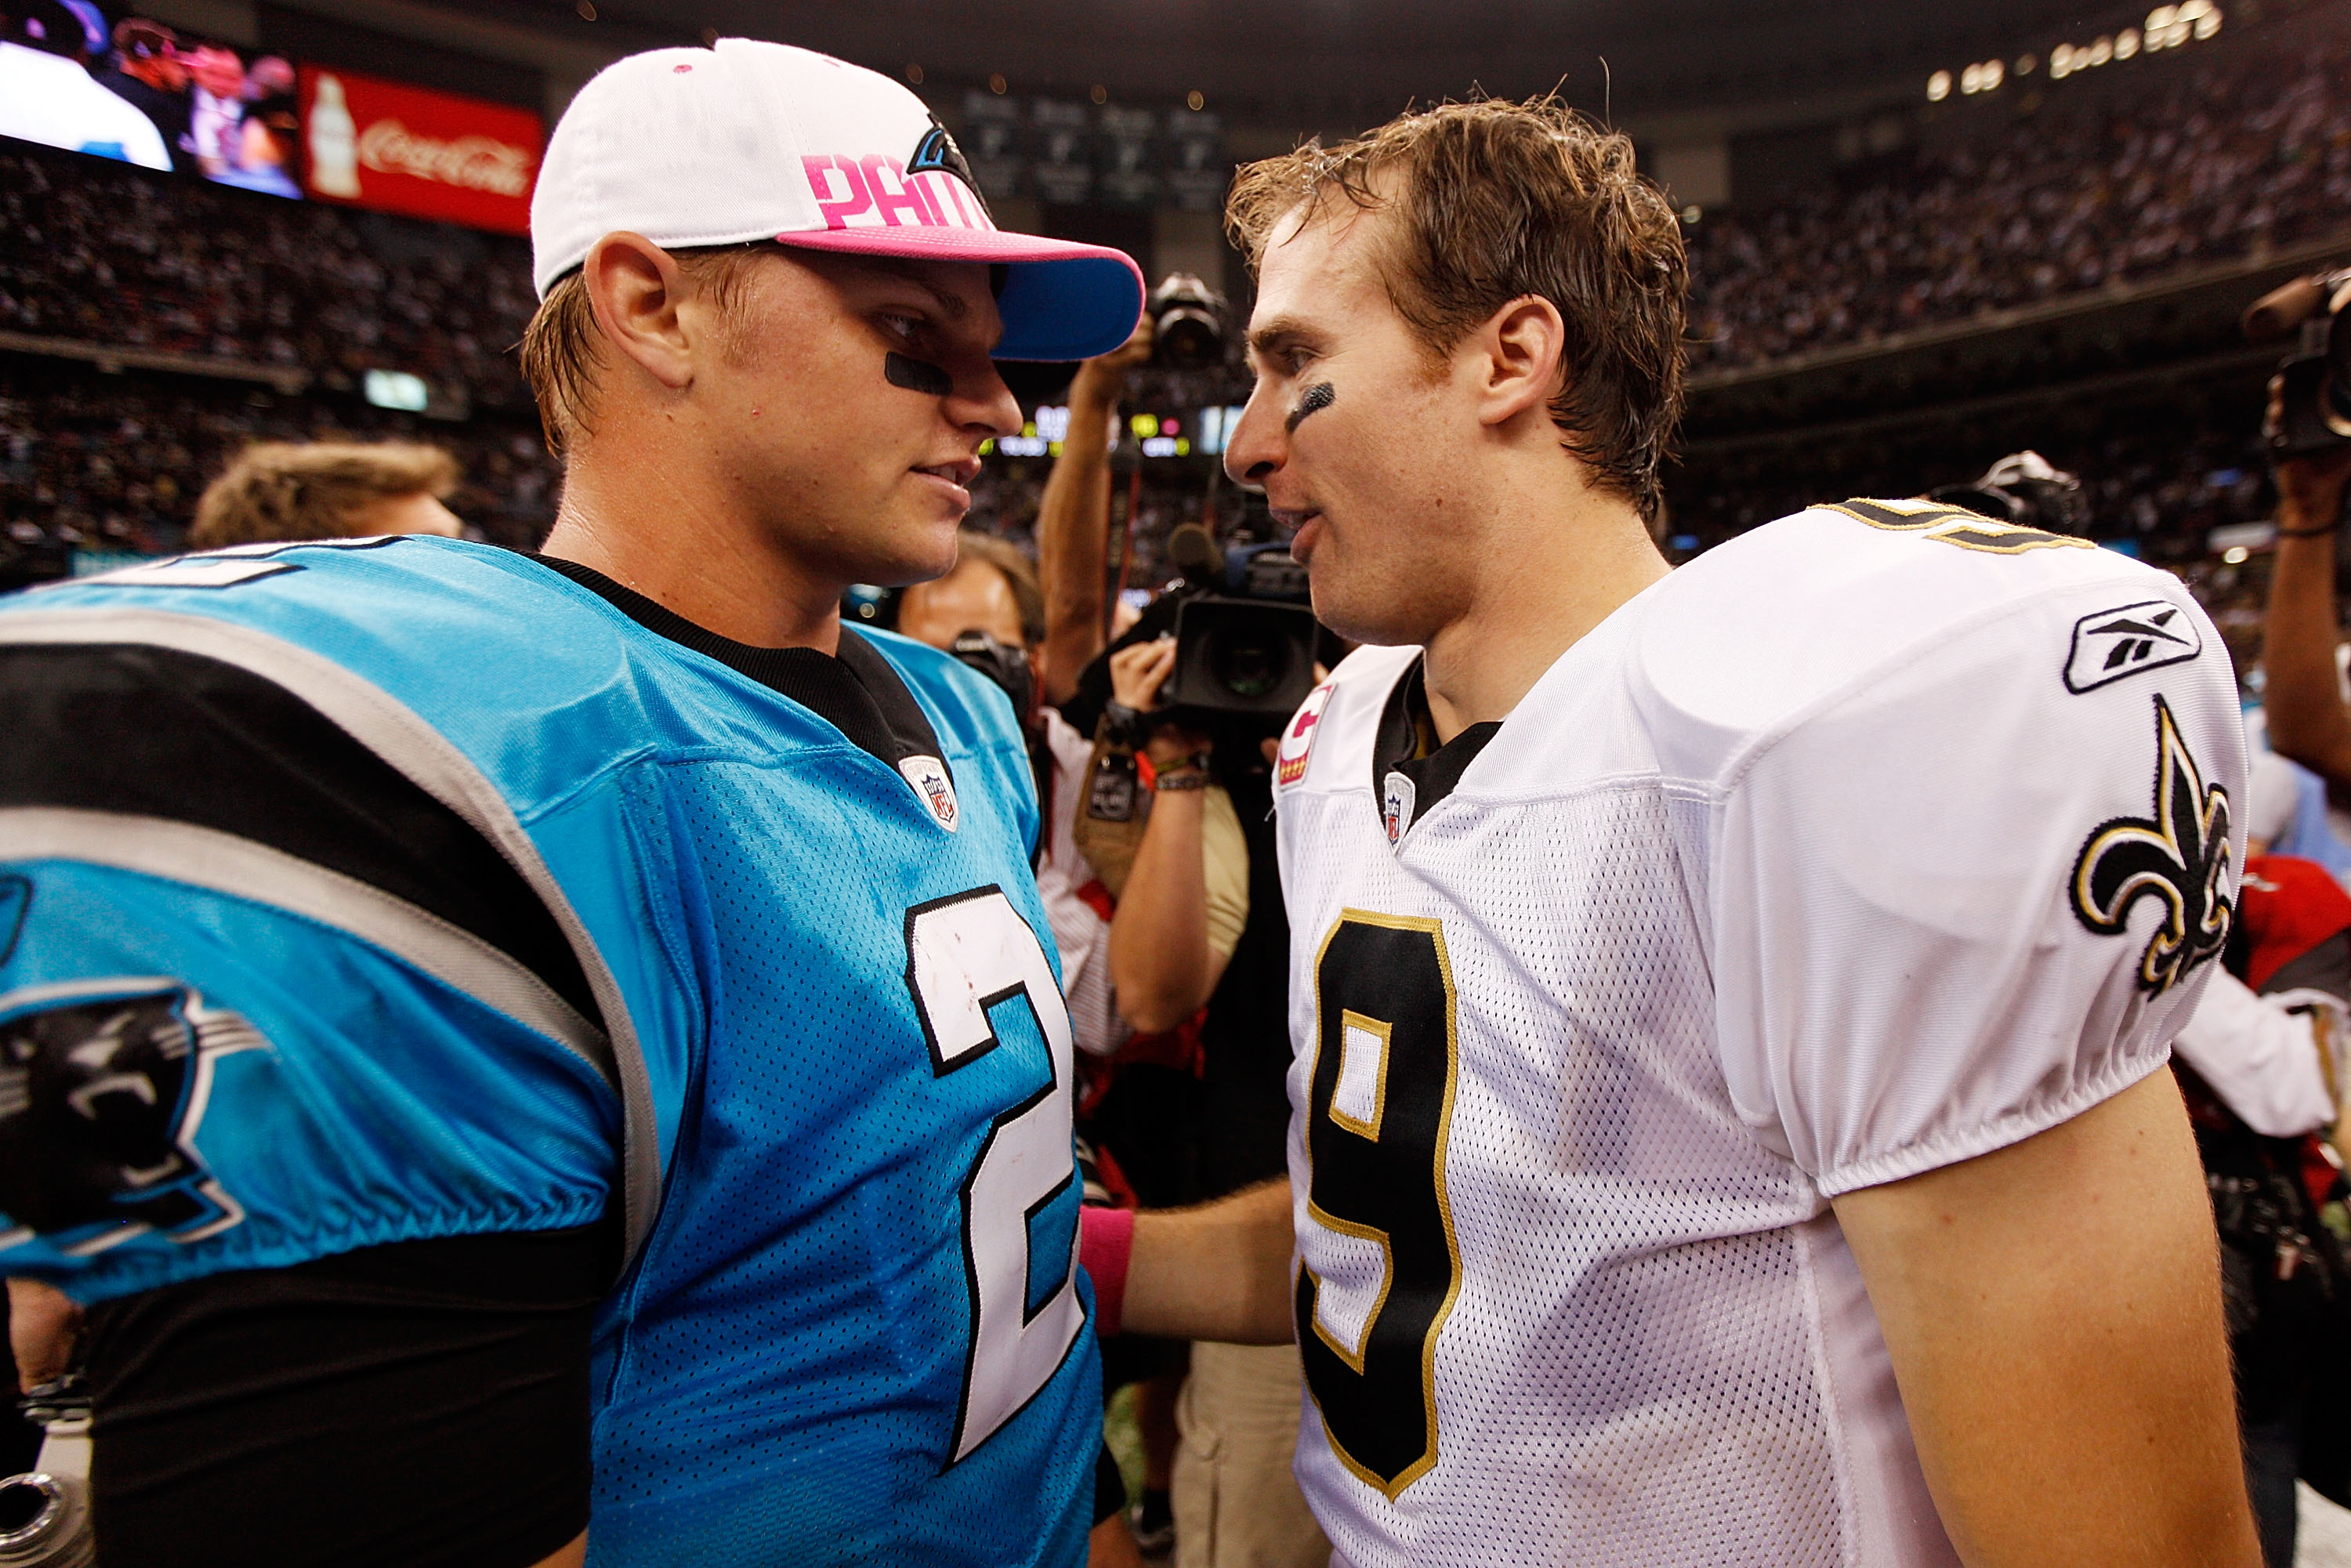 NEW ORLEANS - OCTOBER 03:  Drew Brees #9 of the New Orleans Saints talks with Jimmy Clausen #2 of the Carolina Panthers at the Louisiana Superdome on October 3, 2010 in New Orleans, Louisiana.  The Saints defeated the Panthers 16-14.  (Photo by Chris Gray